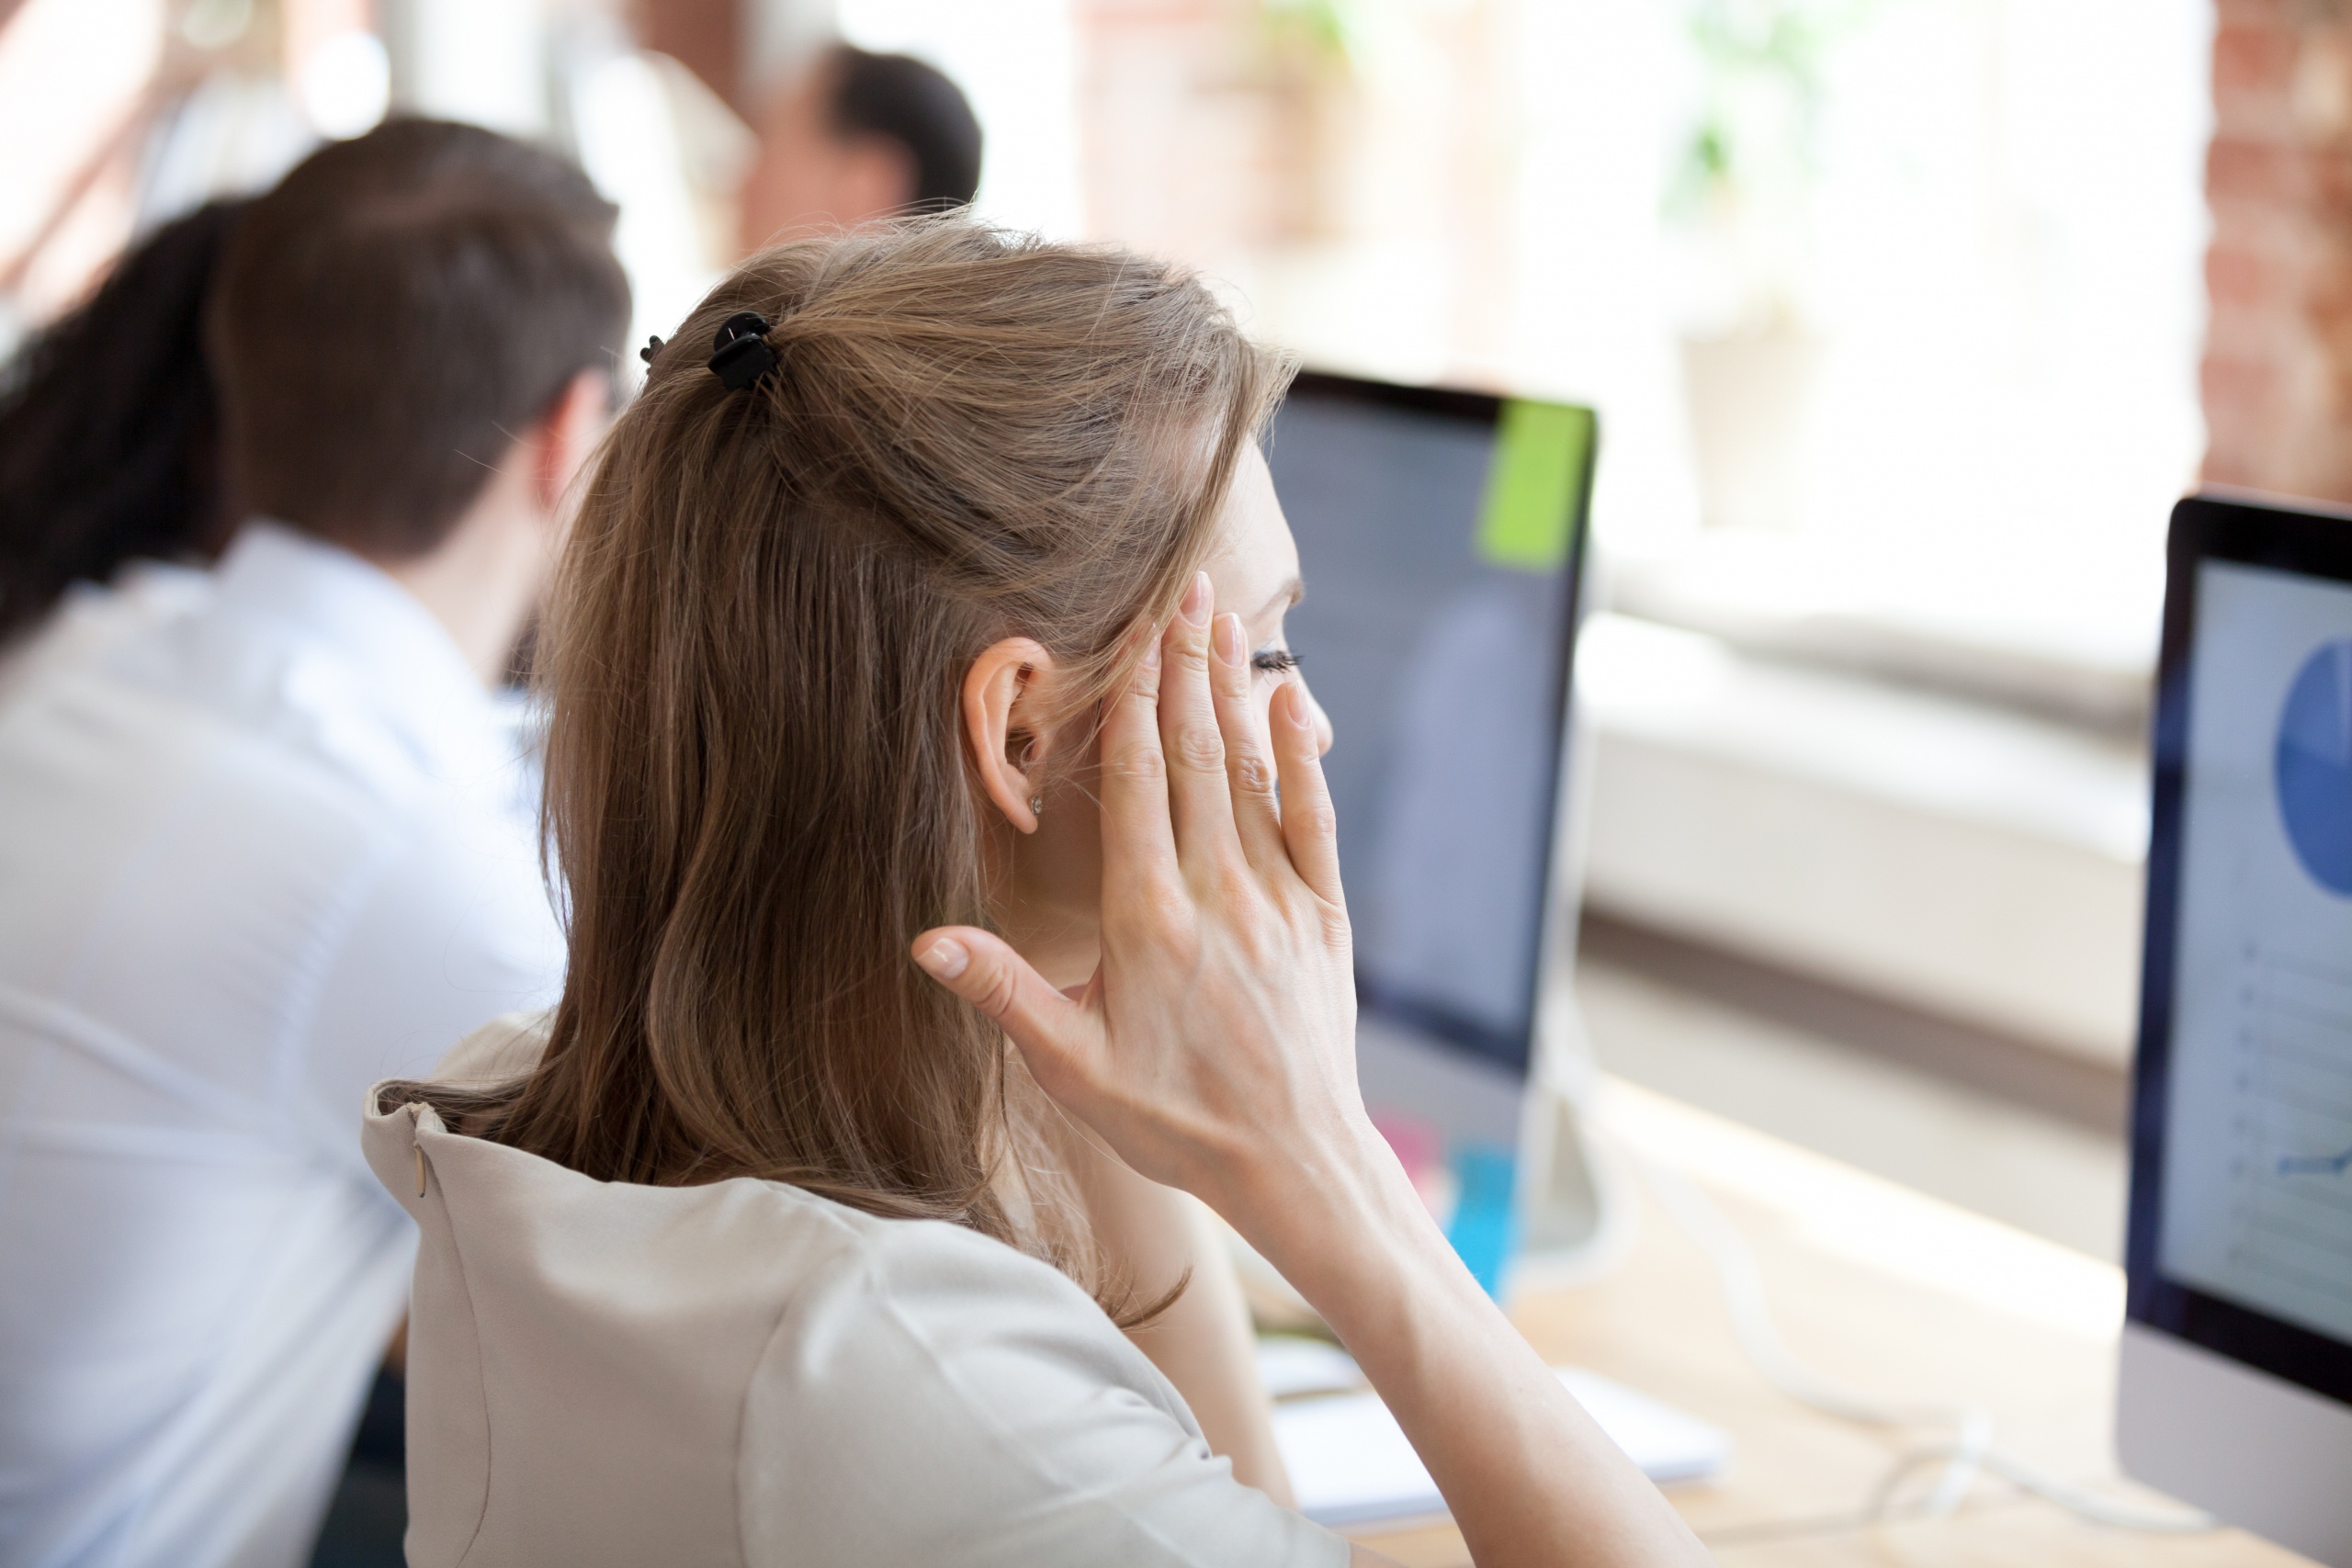 Stressed female employee massaging temples suffering from headache working too long at computer